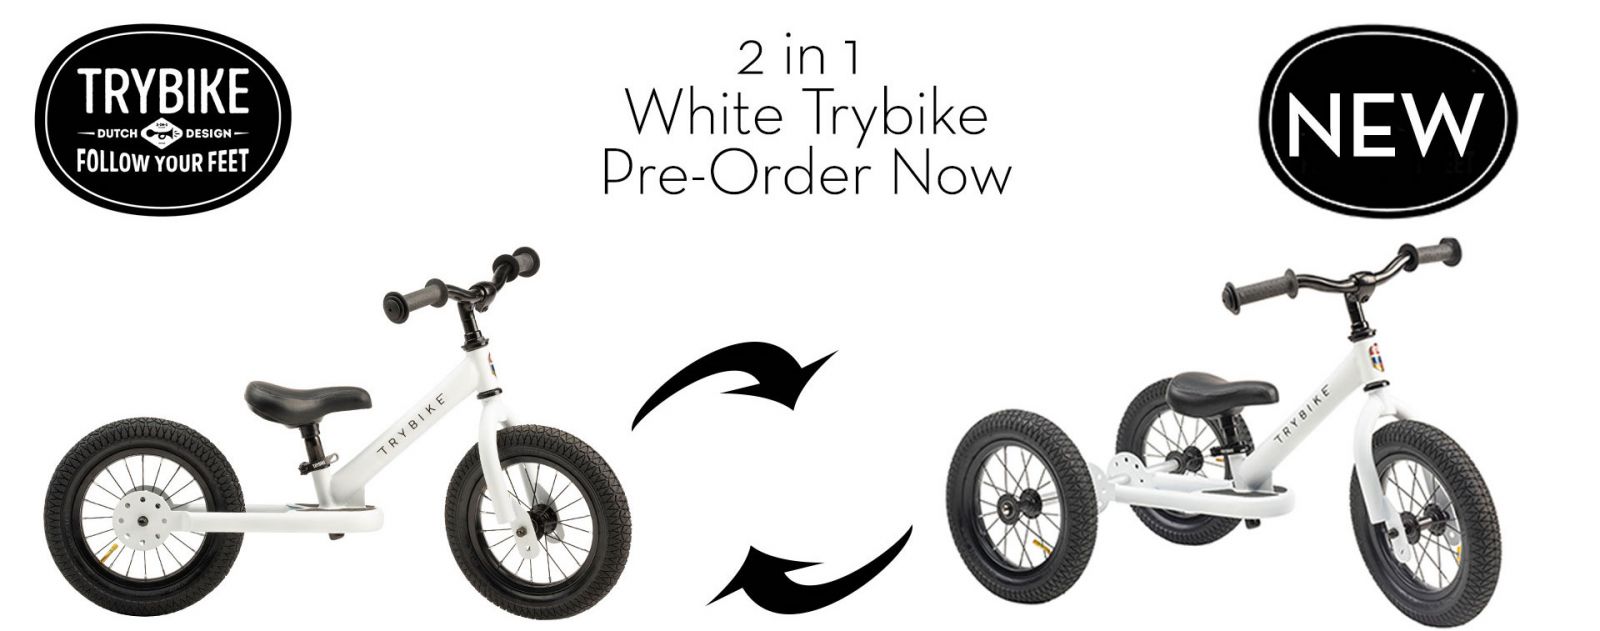 2020 Trybike Colour revealed! It is White